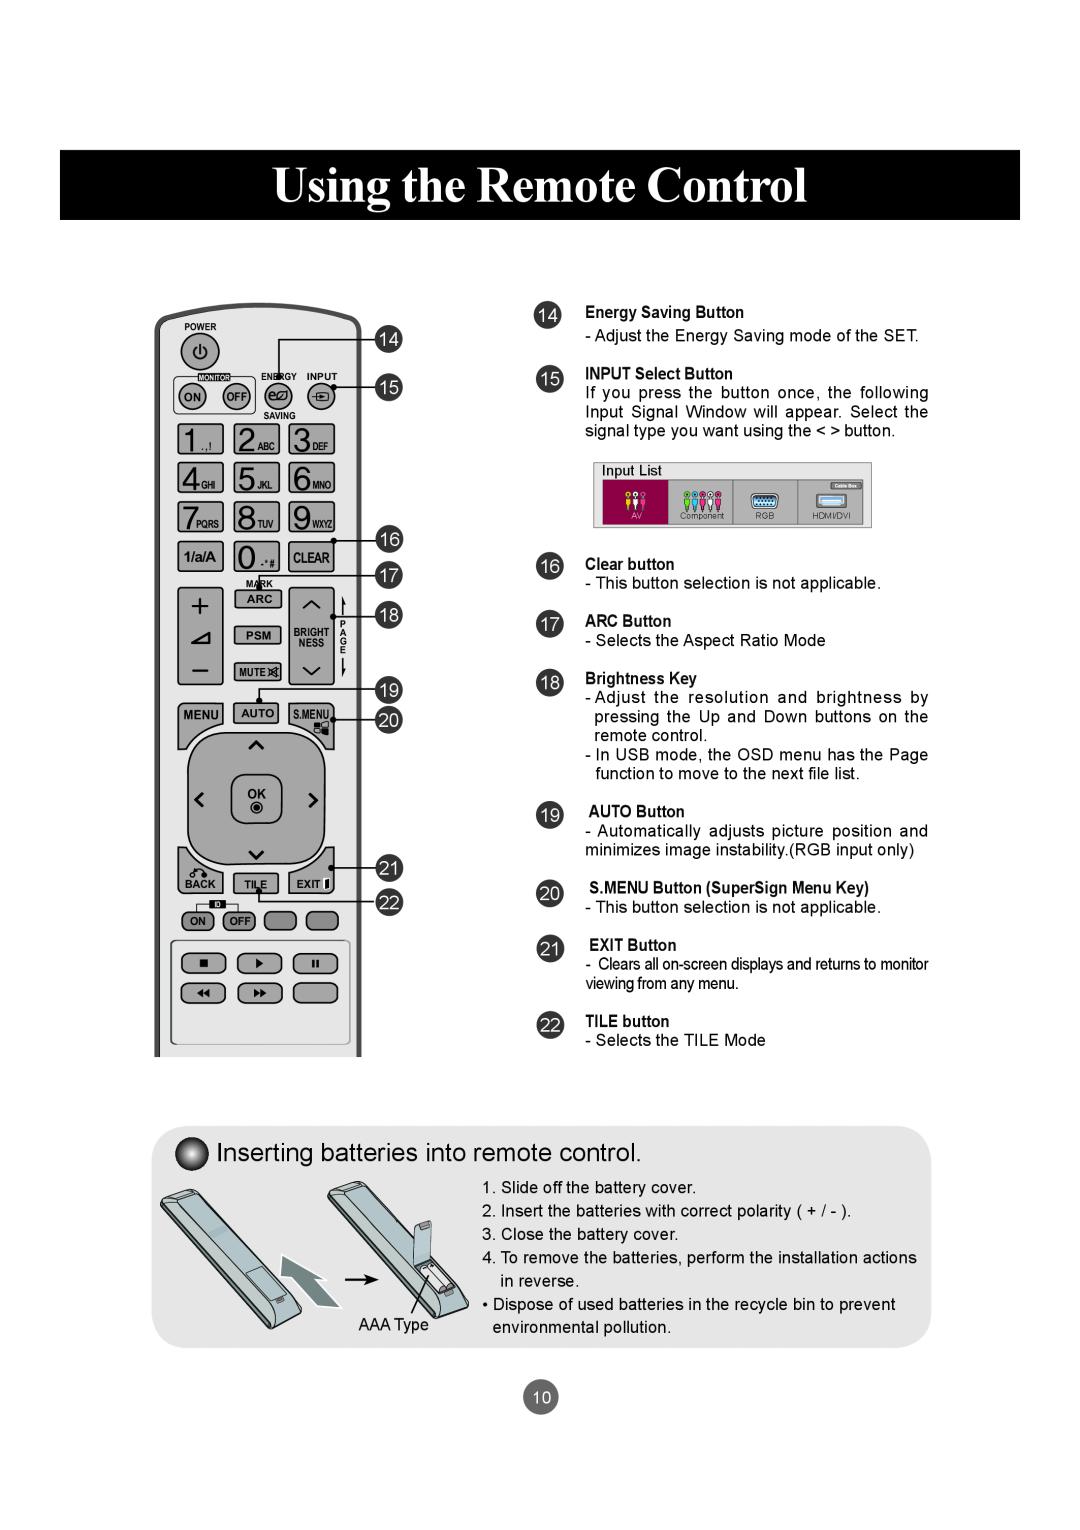 LG Electronics M4720C Inserting batteries into remote control, Using the Remote Control, Energy Saving Button, ARC Button 